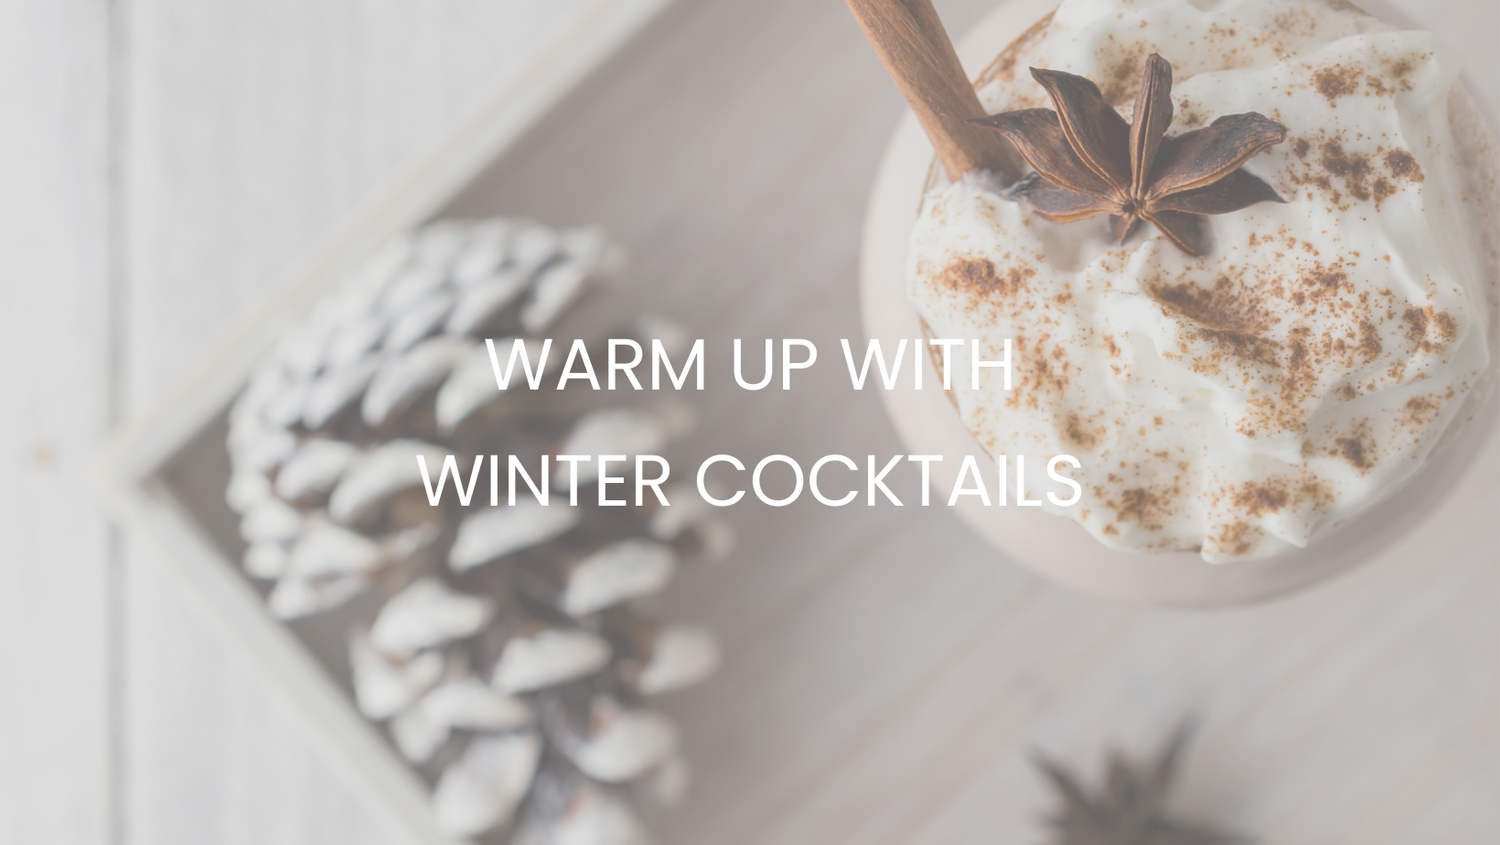 Warm up with Winter Cocktails